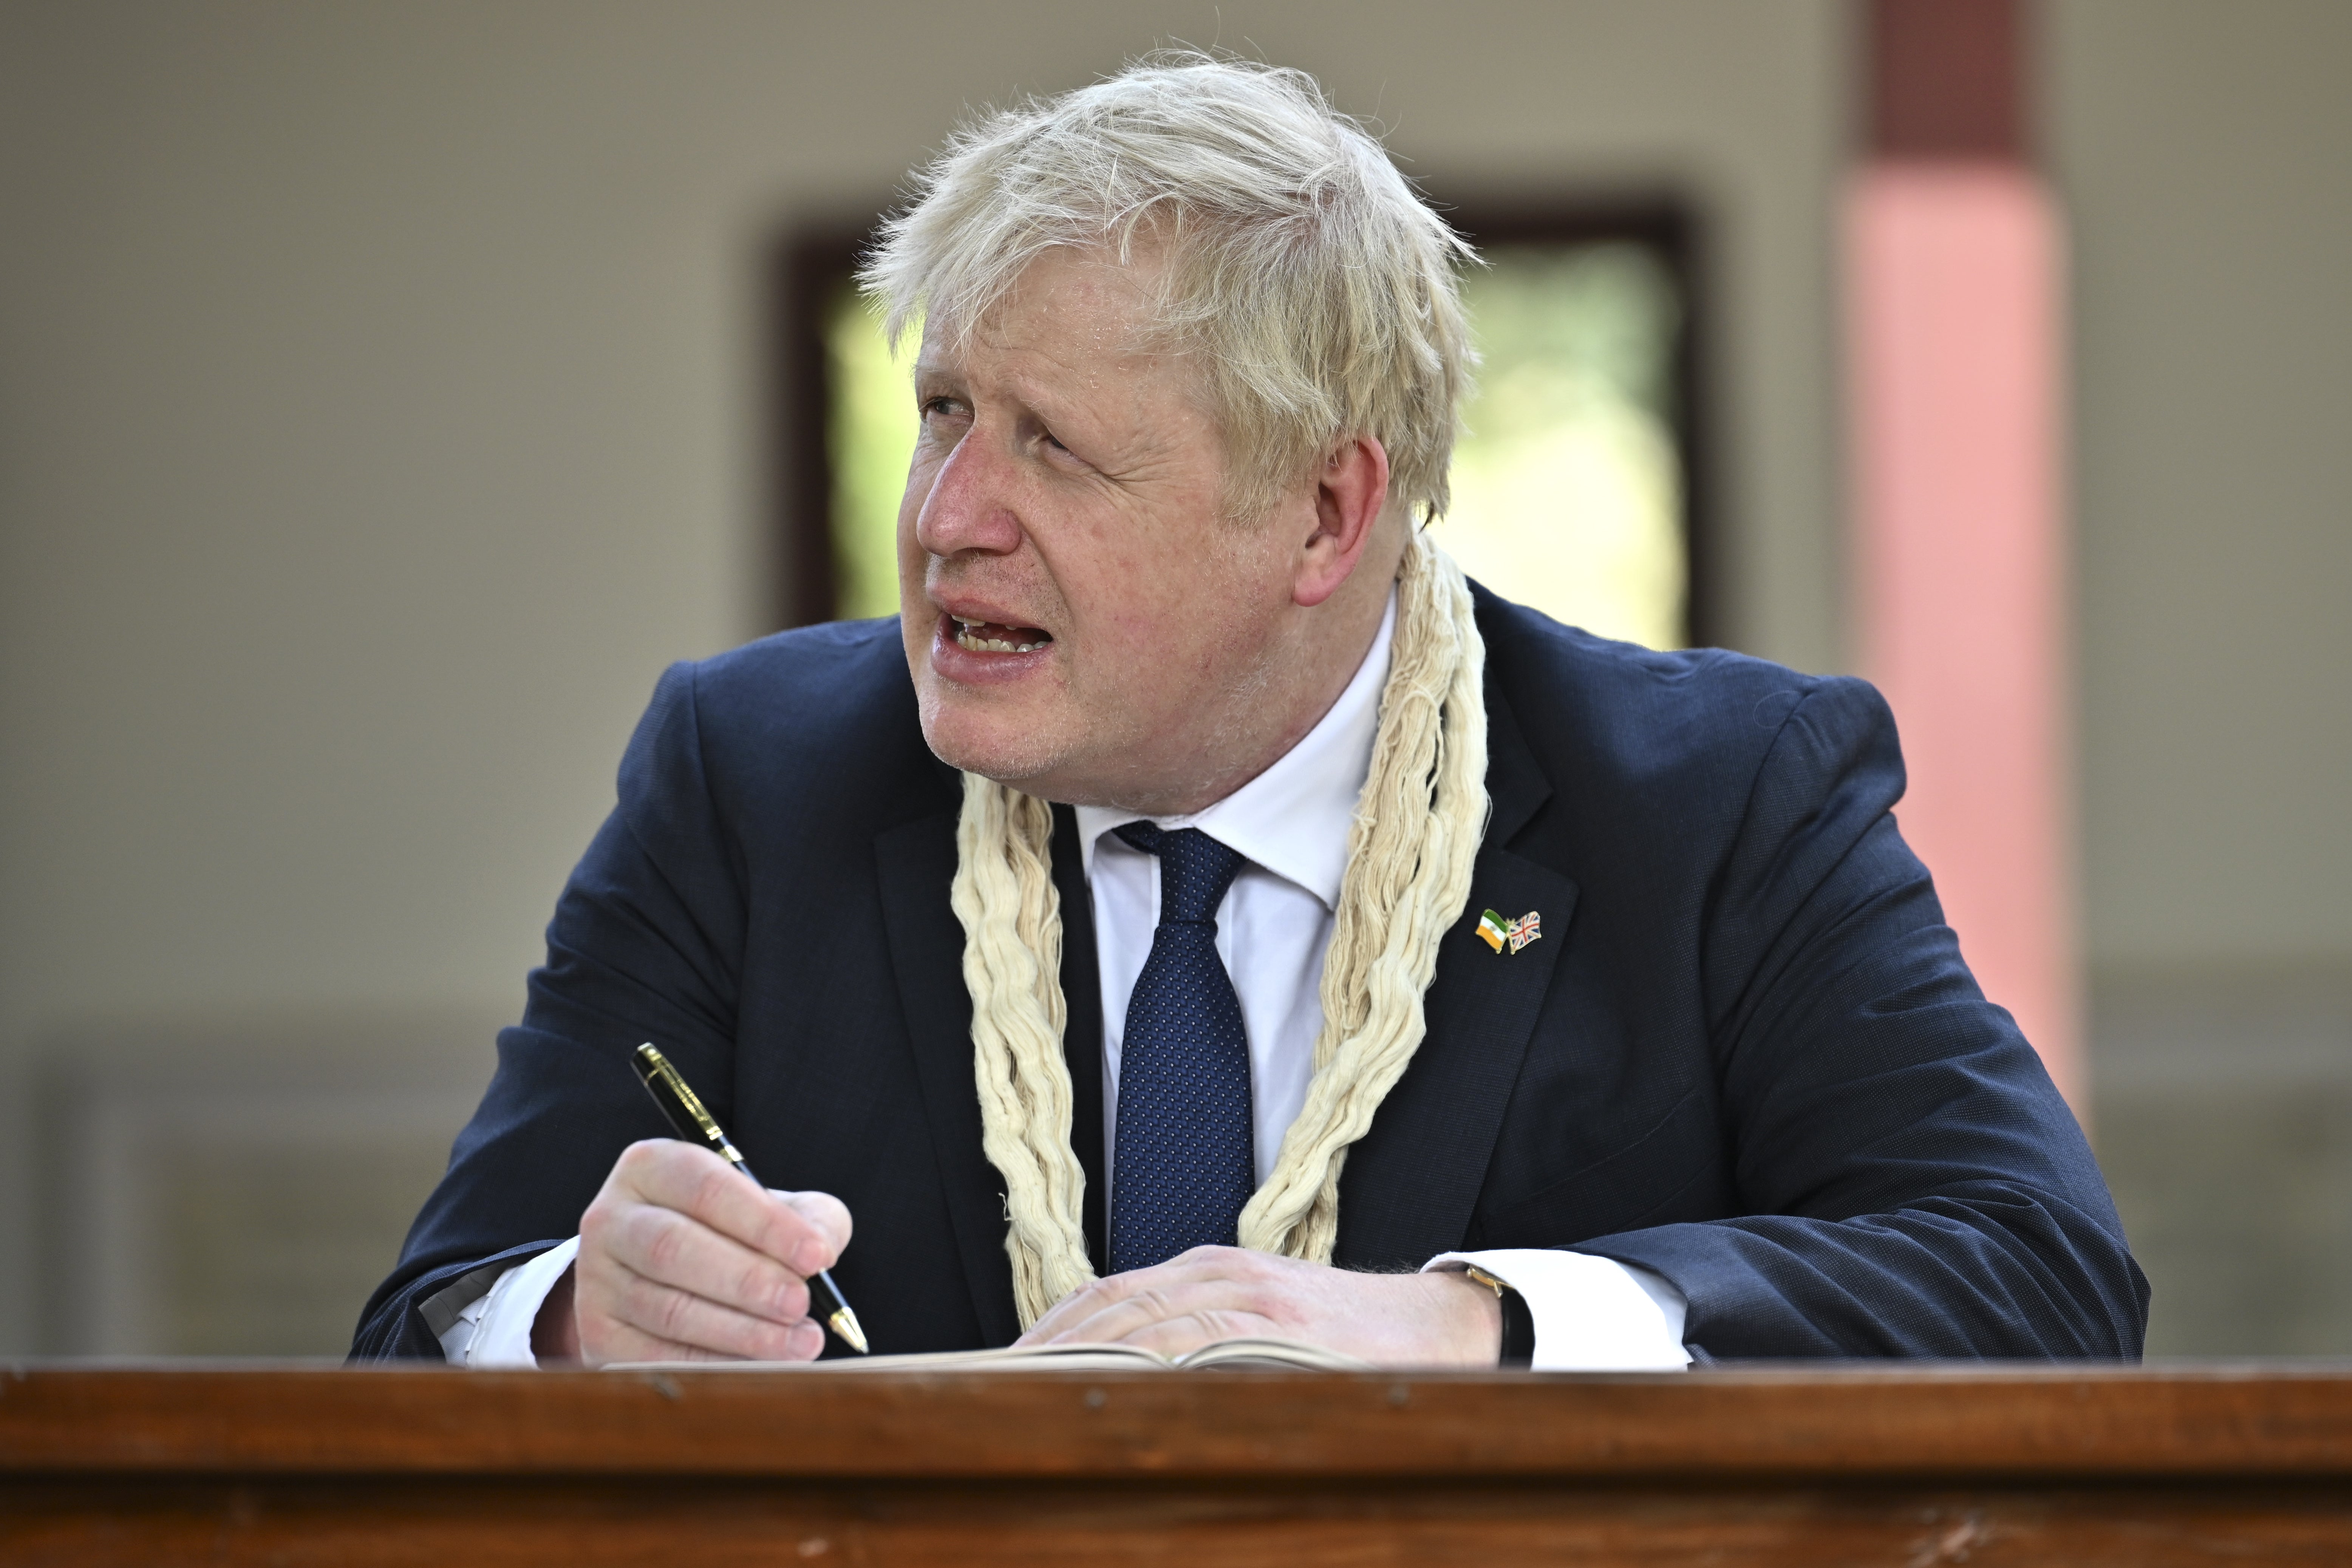 Prime Minister Boris Johnson writes in the visitors’ book during his visit to Mahatma Gandhi’s Sabarmati Ashram in Ahmedabad, as part of his two day trip to India (Stefan Rousseau/PA)